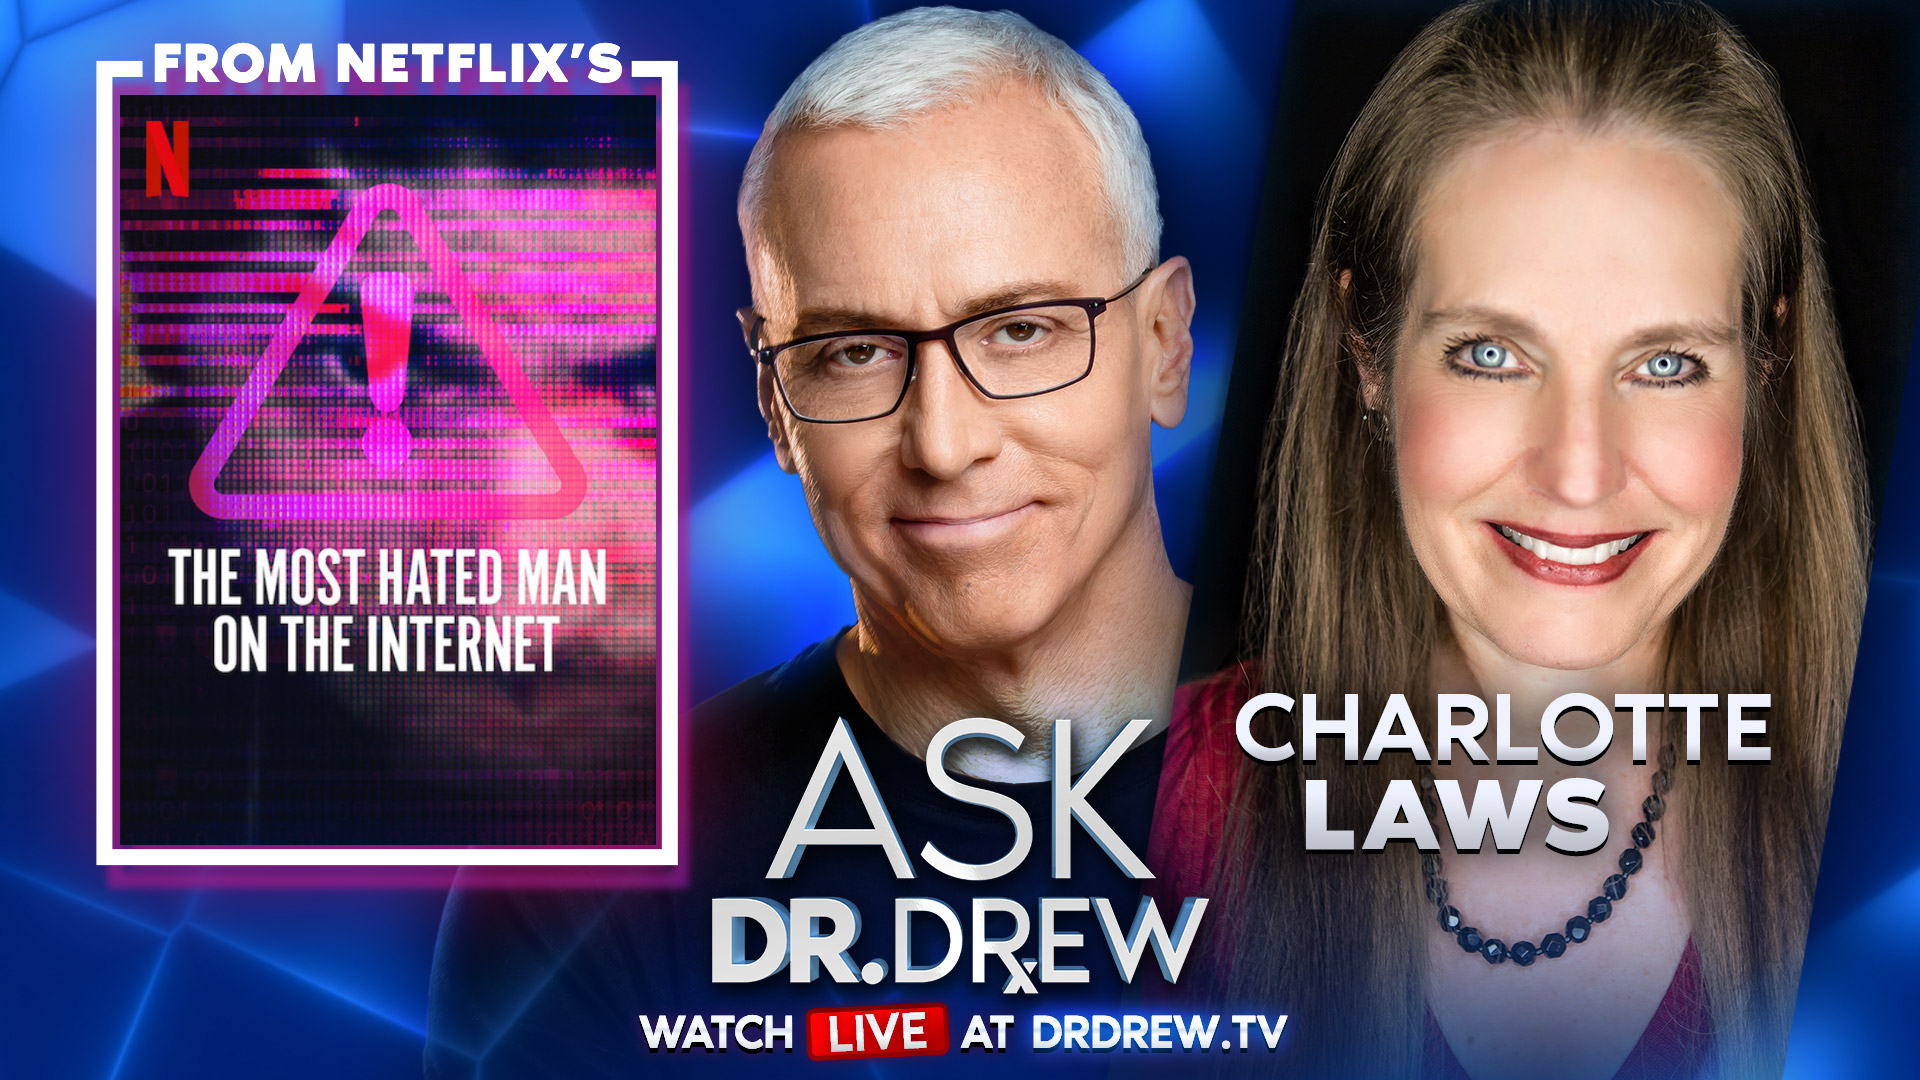 Charlotte Laws (Fierce Mom in Netflix’s “The Most Hated Man On The Internet”) LIVE – Ask Dr. Drew